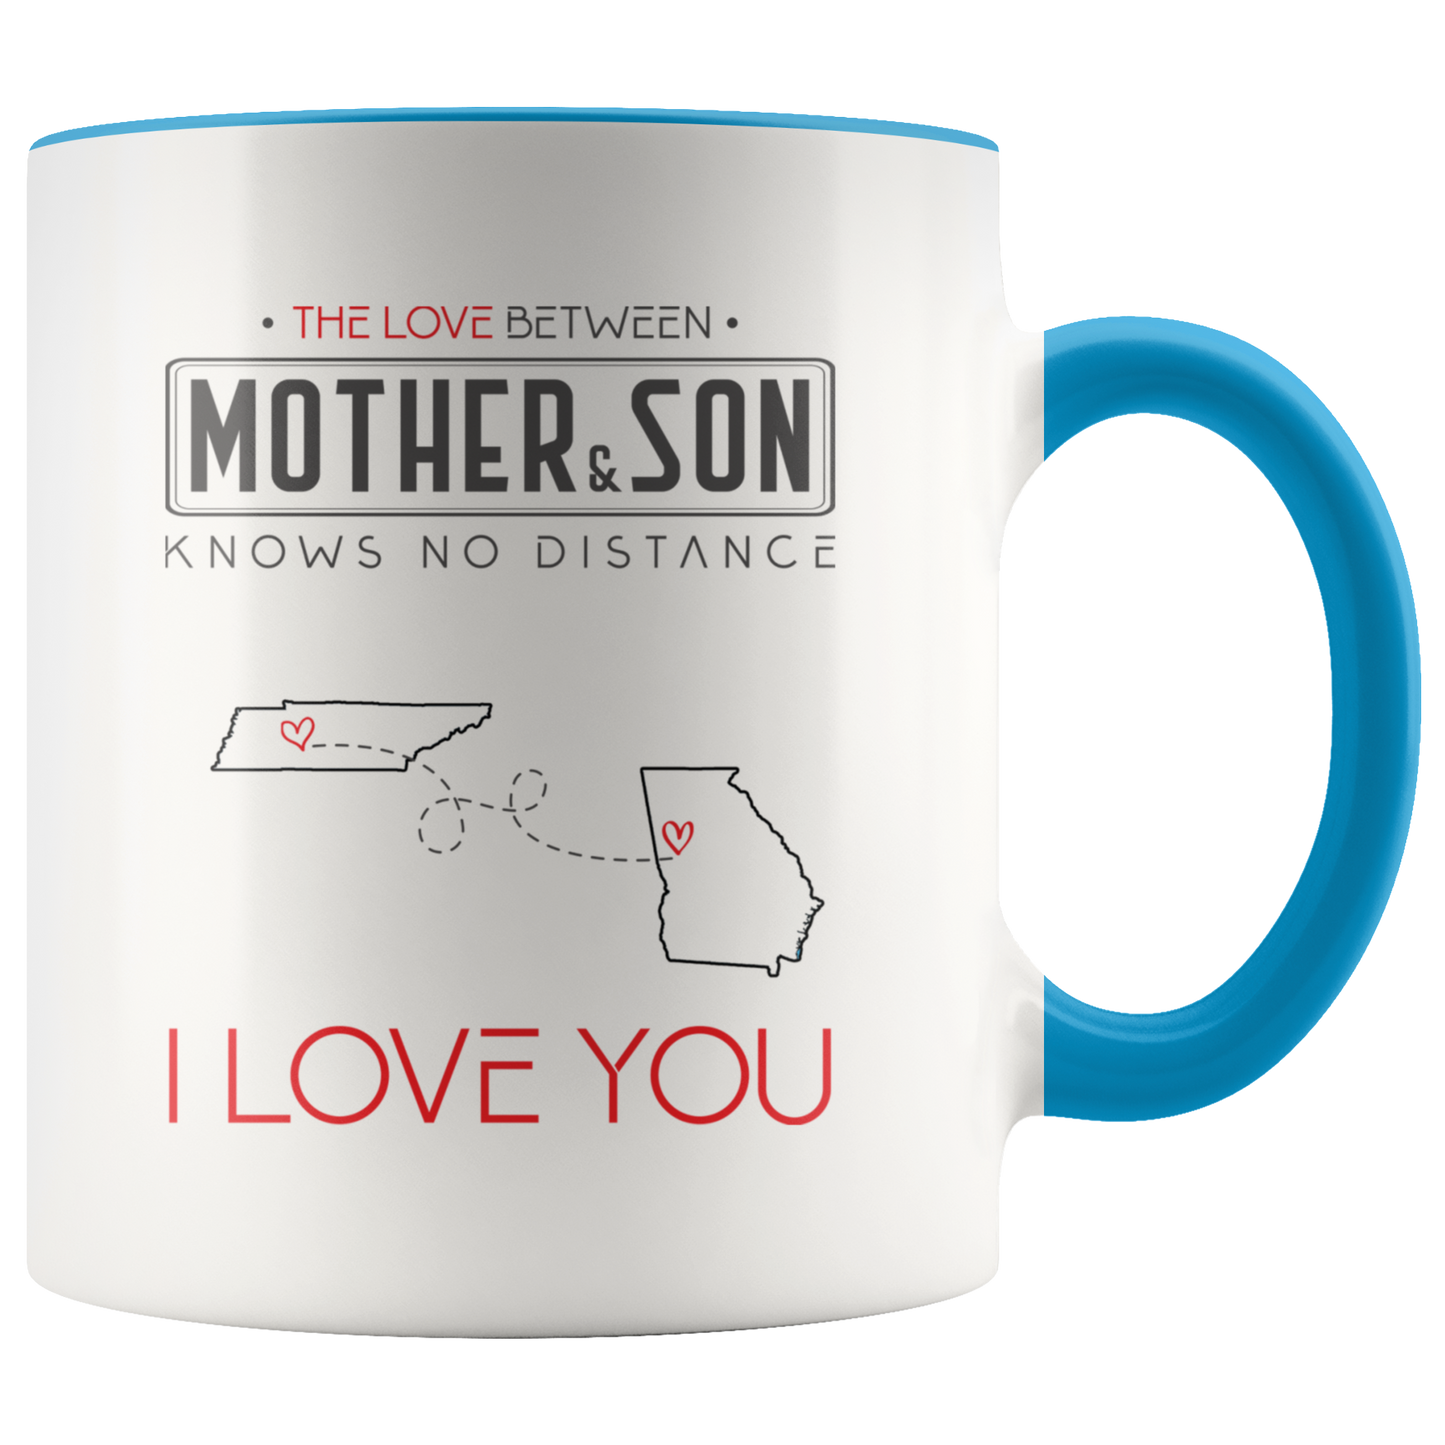 ND-21315793-sp-23363 - Mom And Son Accent Mug 11 oz Red - The Love Between Mother A